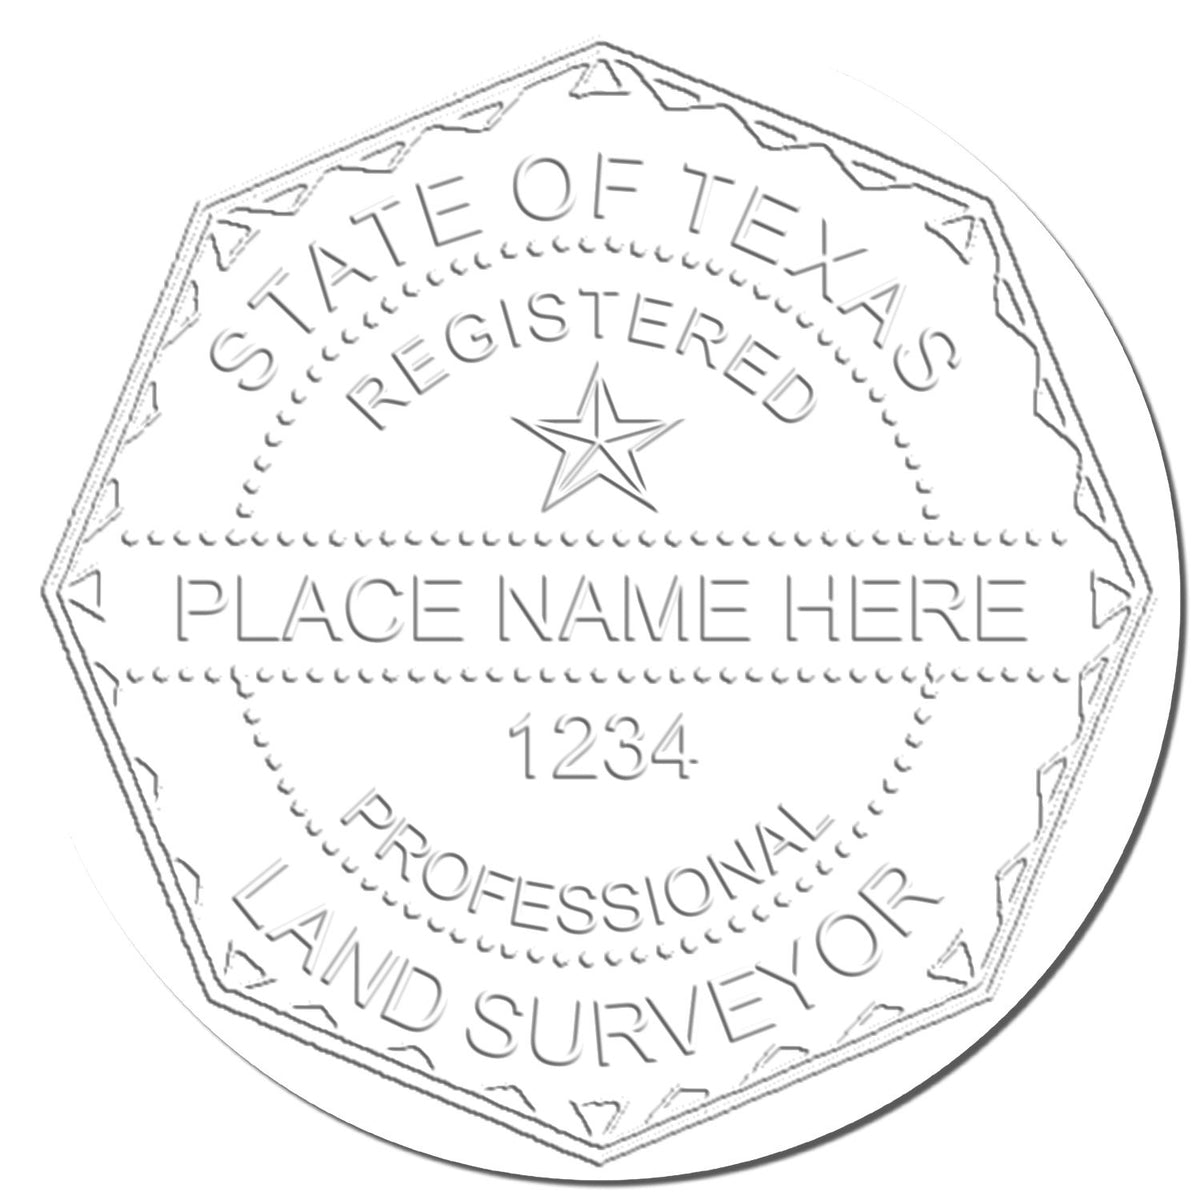 This paper is stamped with a sample imprint of the State of Texas Soft Land Surveyor Embossing Seal, signifying its quality and reliability.